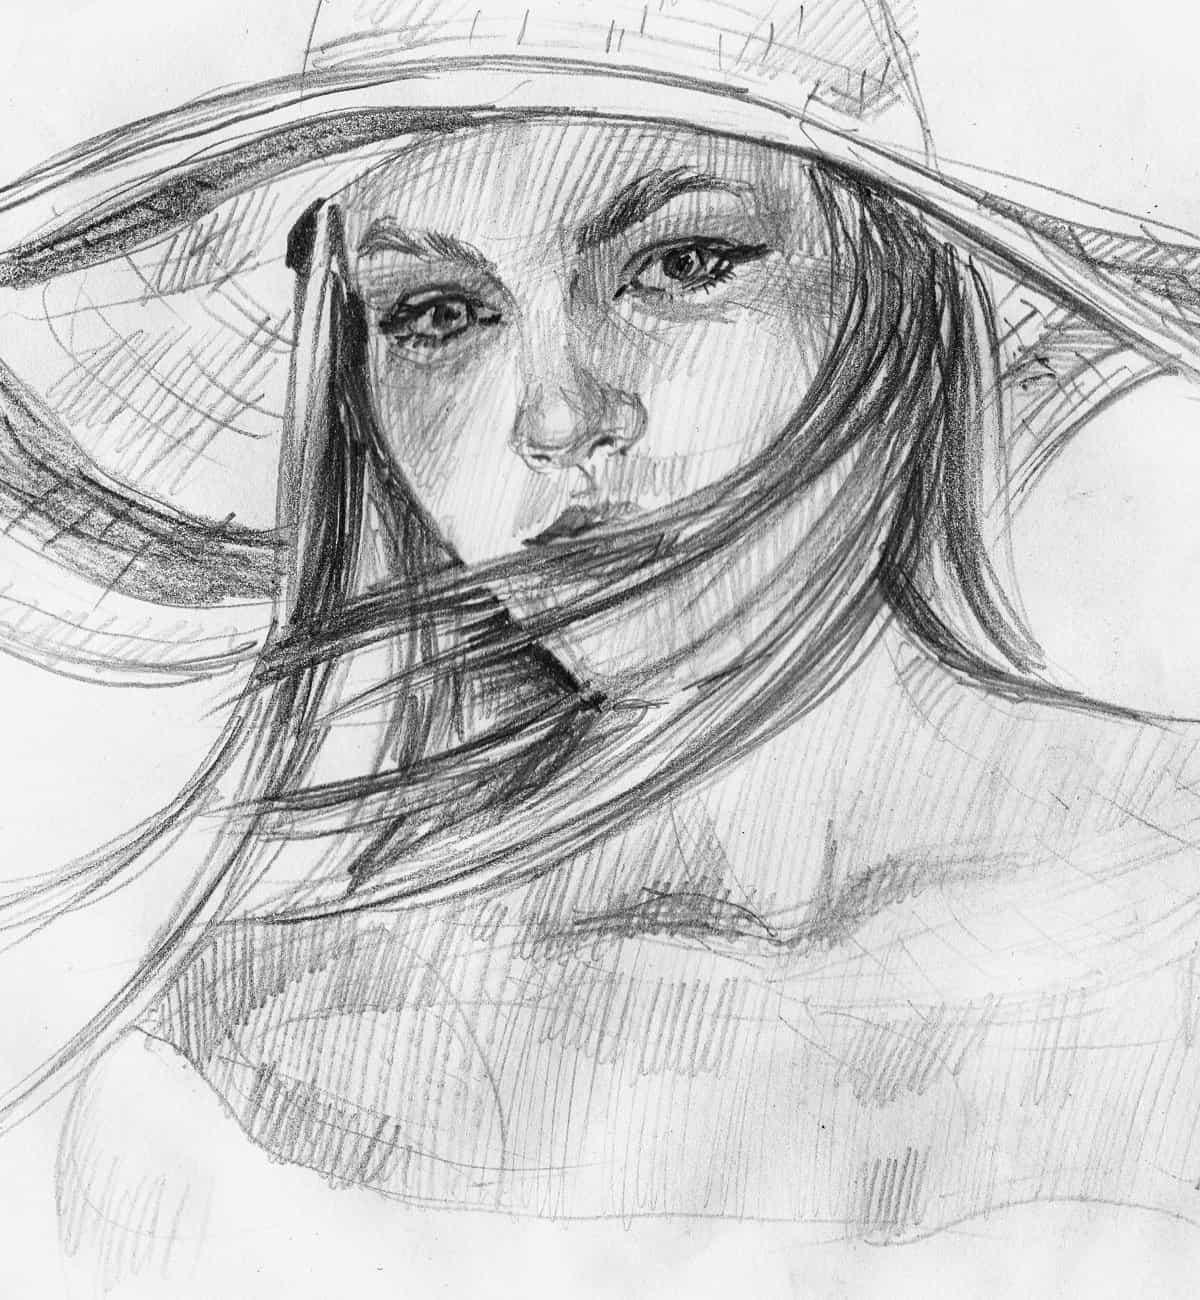 Sketch of a woman with flowing long hair and wearing a hat